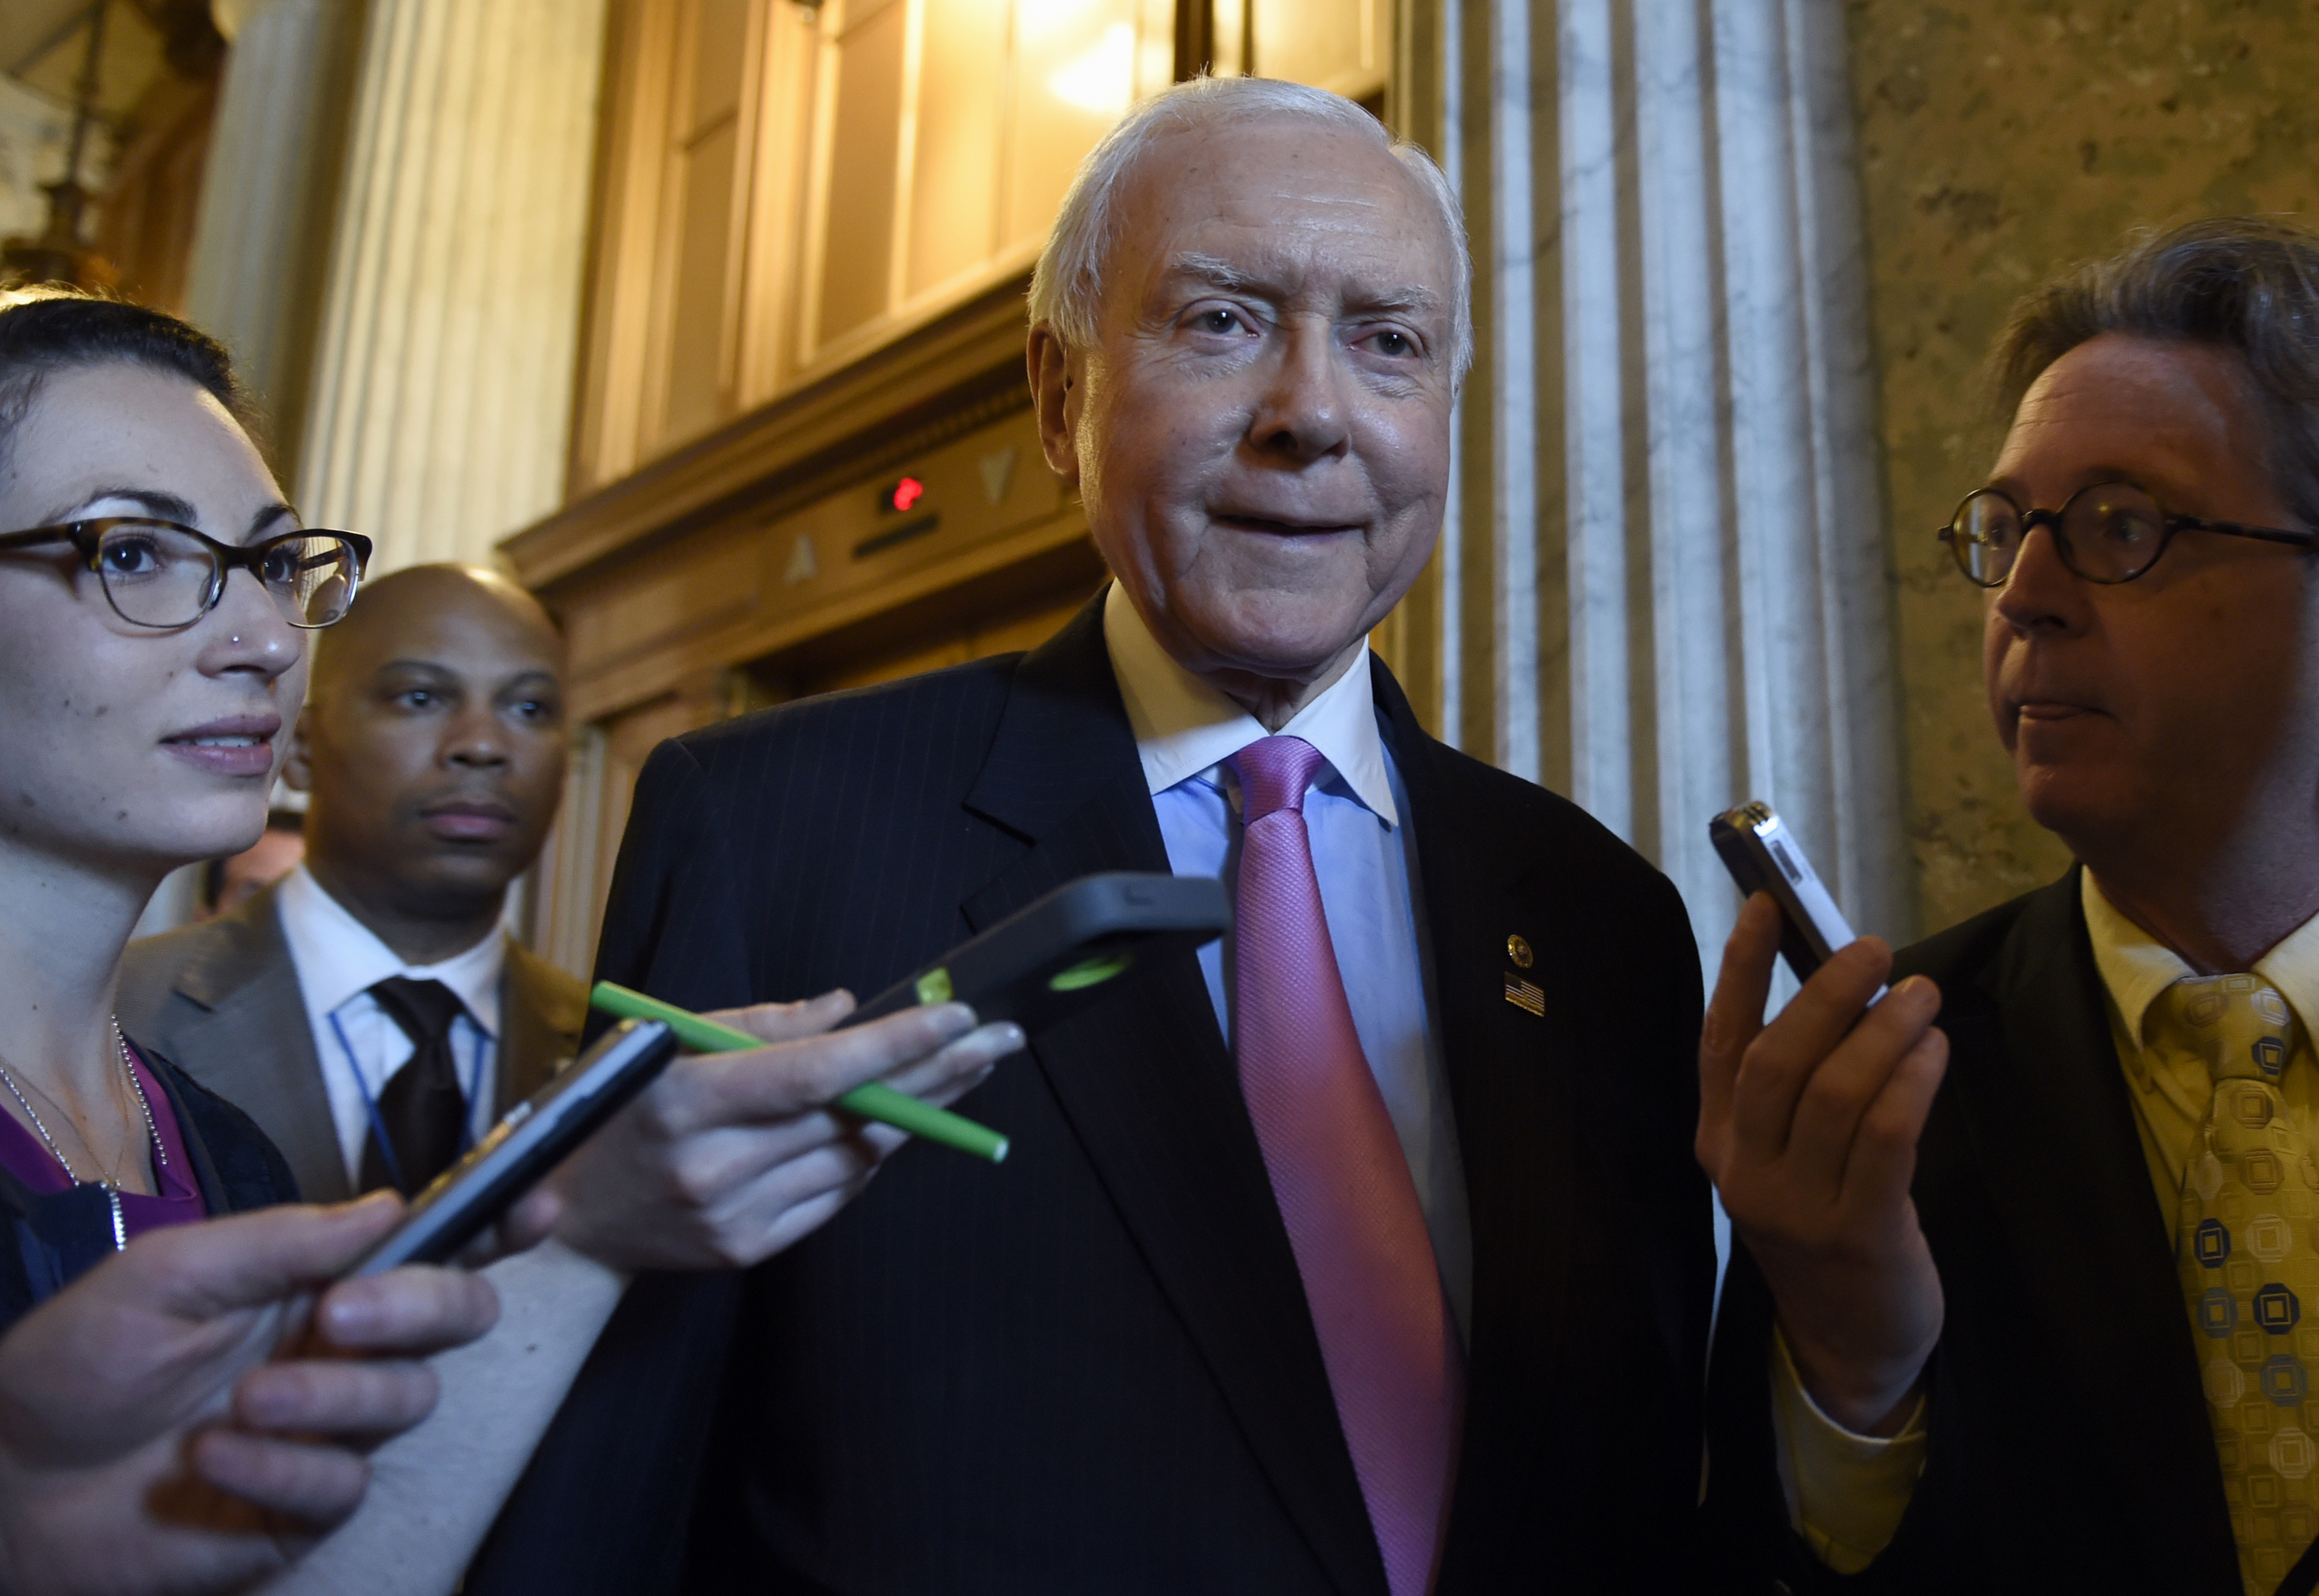 "Unfortunately I am afraid this deal appears to fall woefully short" Sen. Orrin G. Hatch (R-Utah), chairman of the Senate Finance Committee and one of the most important senators in the trade deal debate. (Susan Walsh/AP)